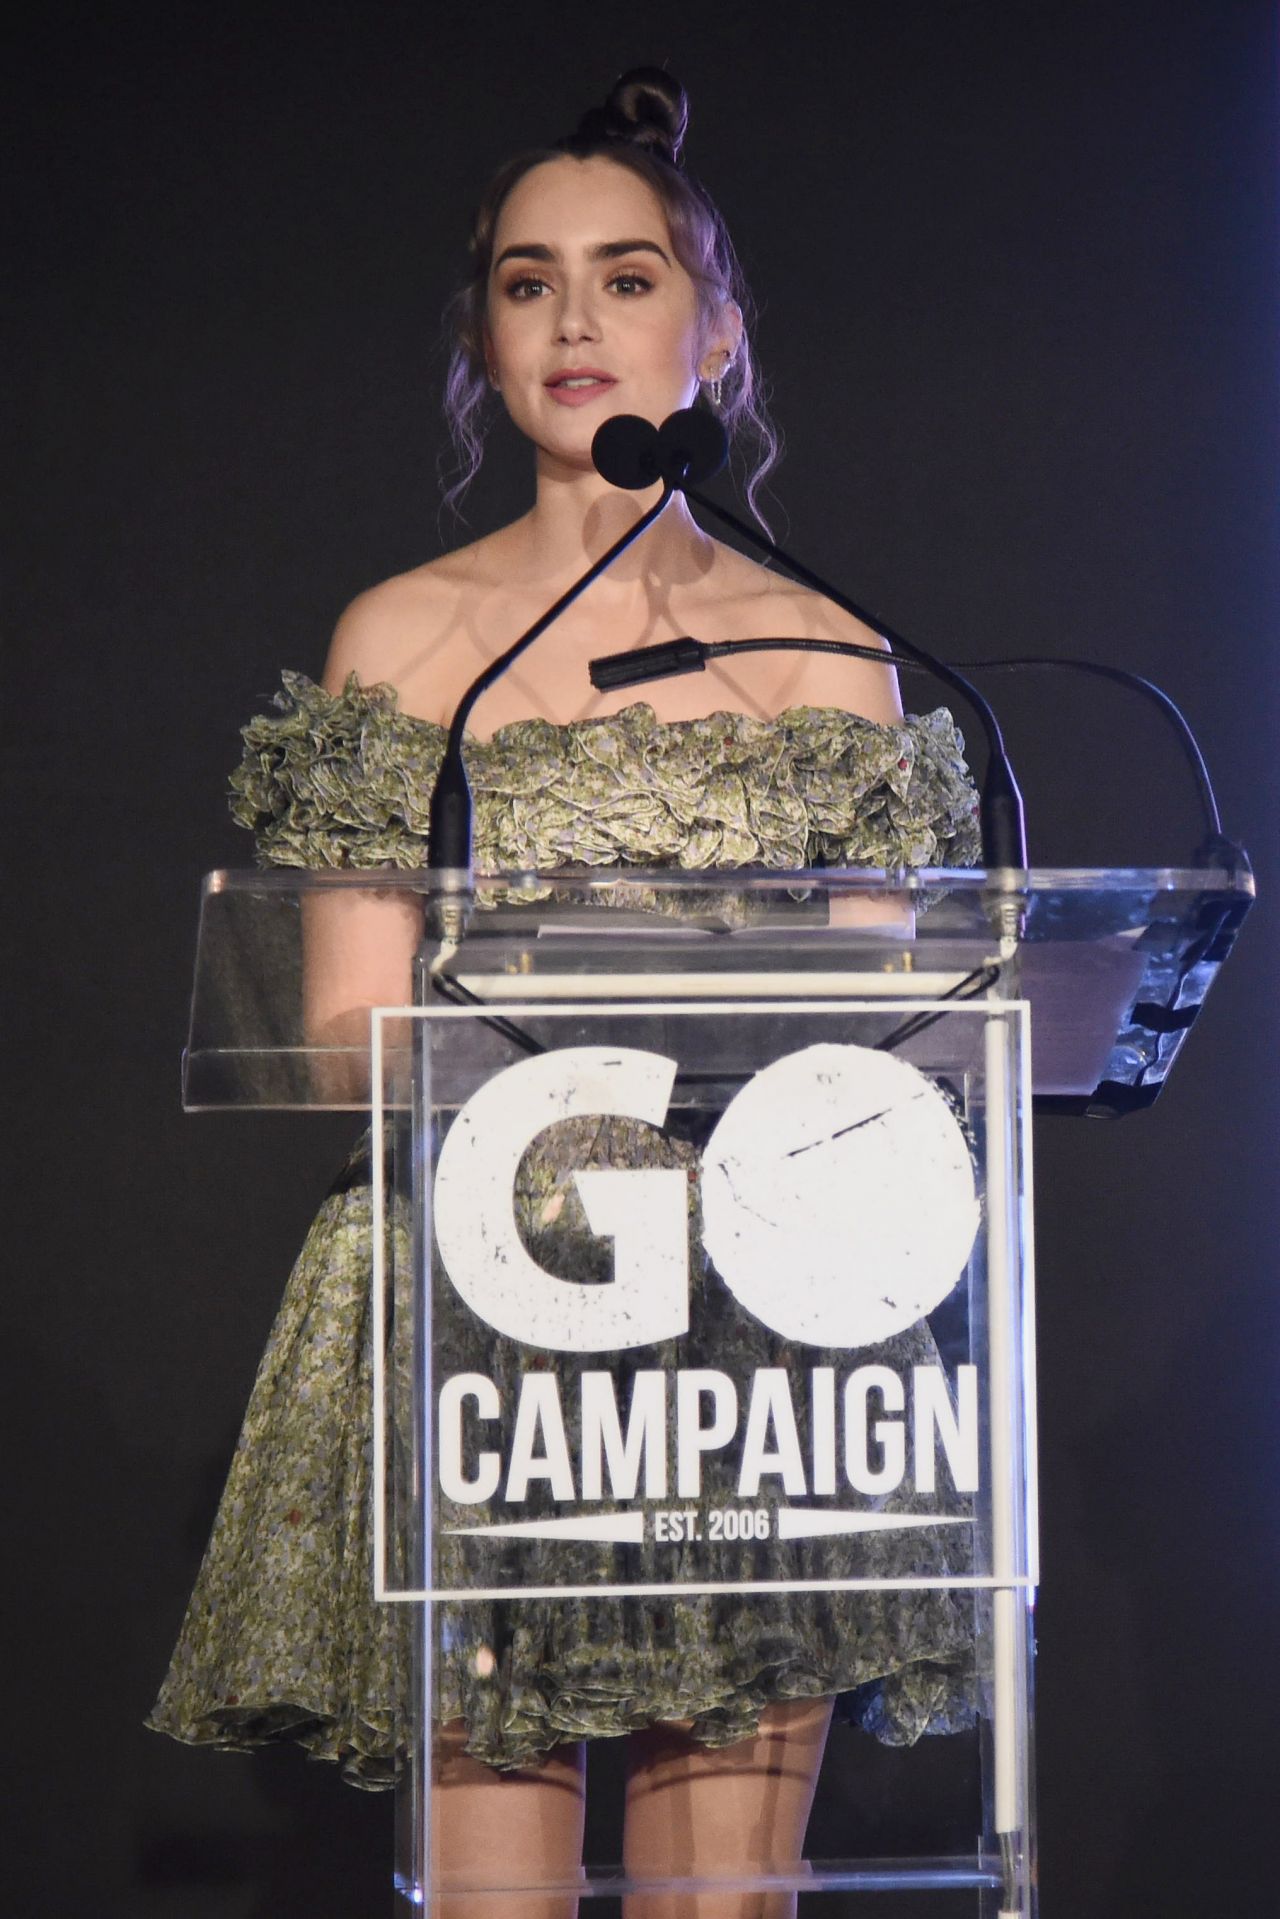 lily-collins-go-campaign-gala-in-los-angeles-10-20-2018-6.jpg